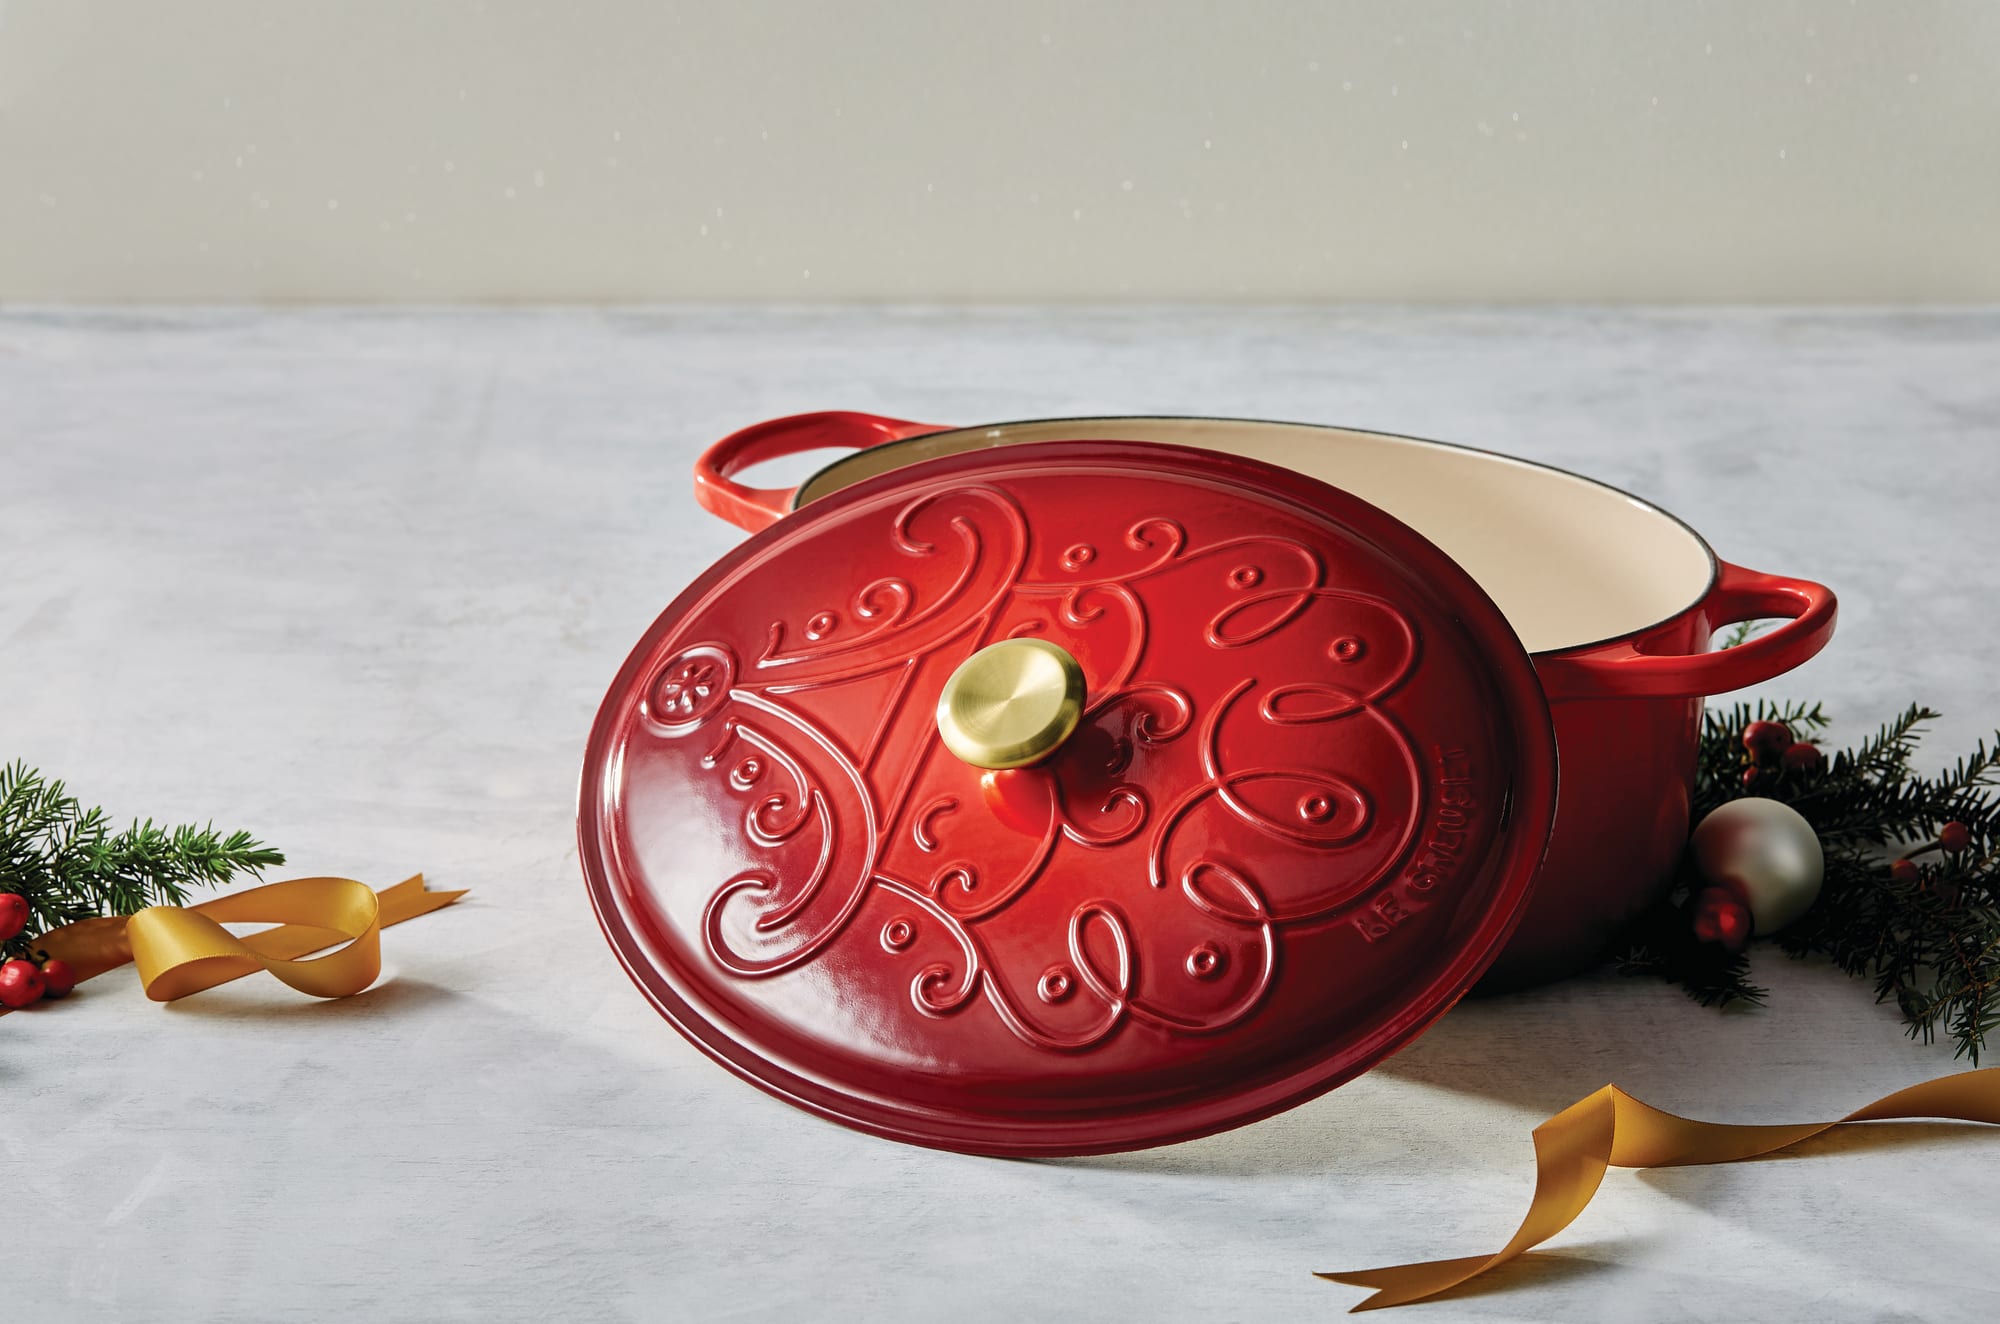 New Le Creuset Holiday Collection sparks new holiday traditions